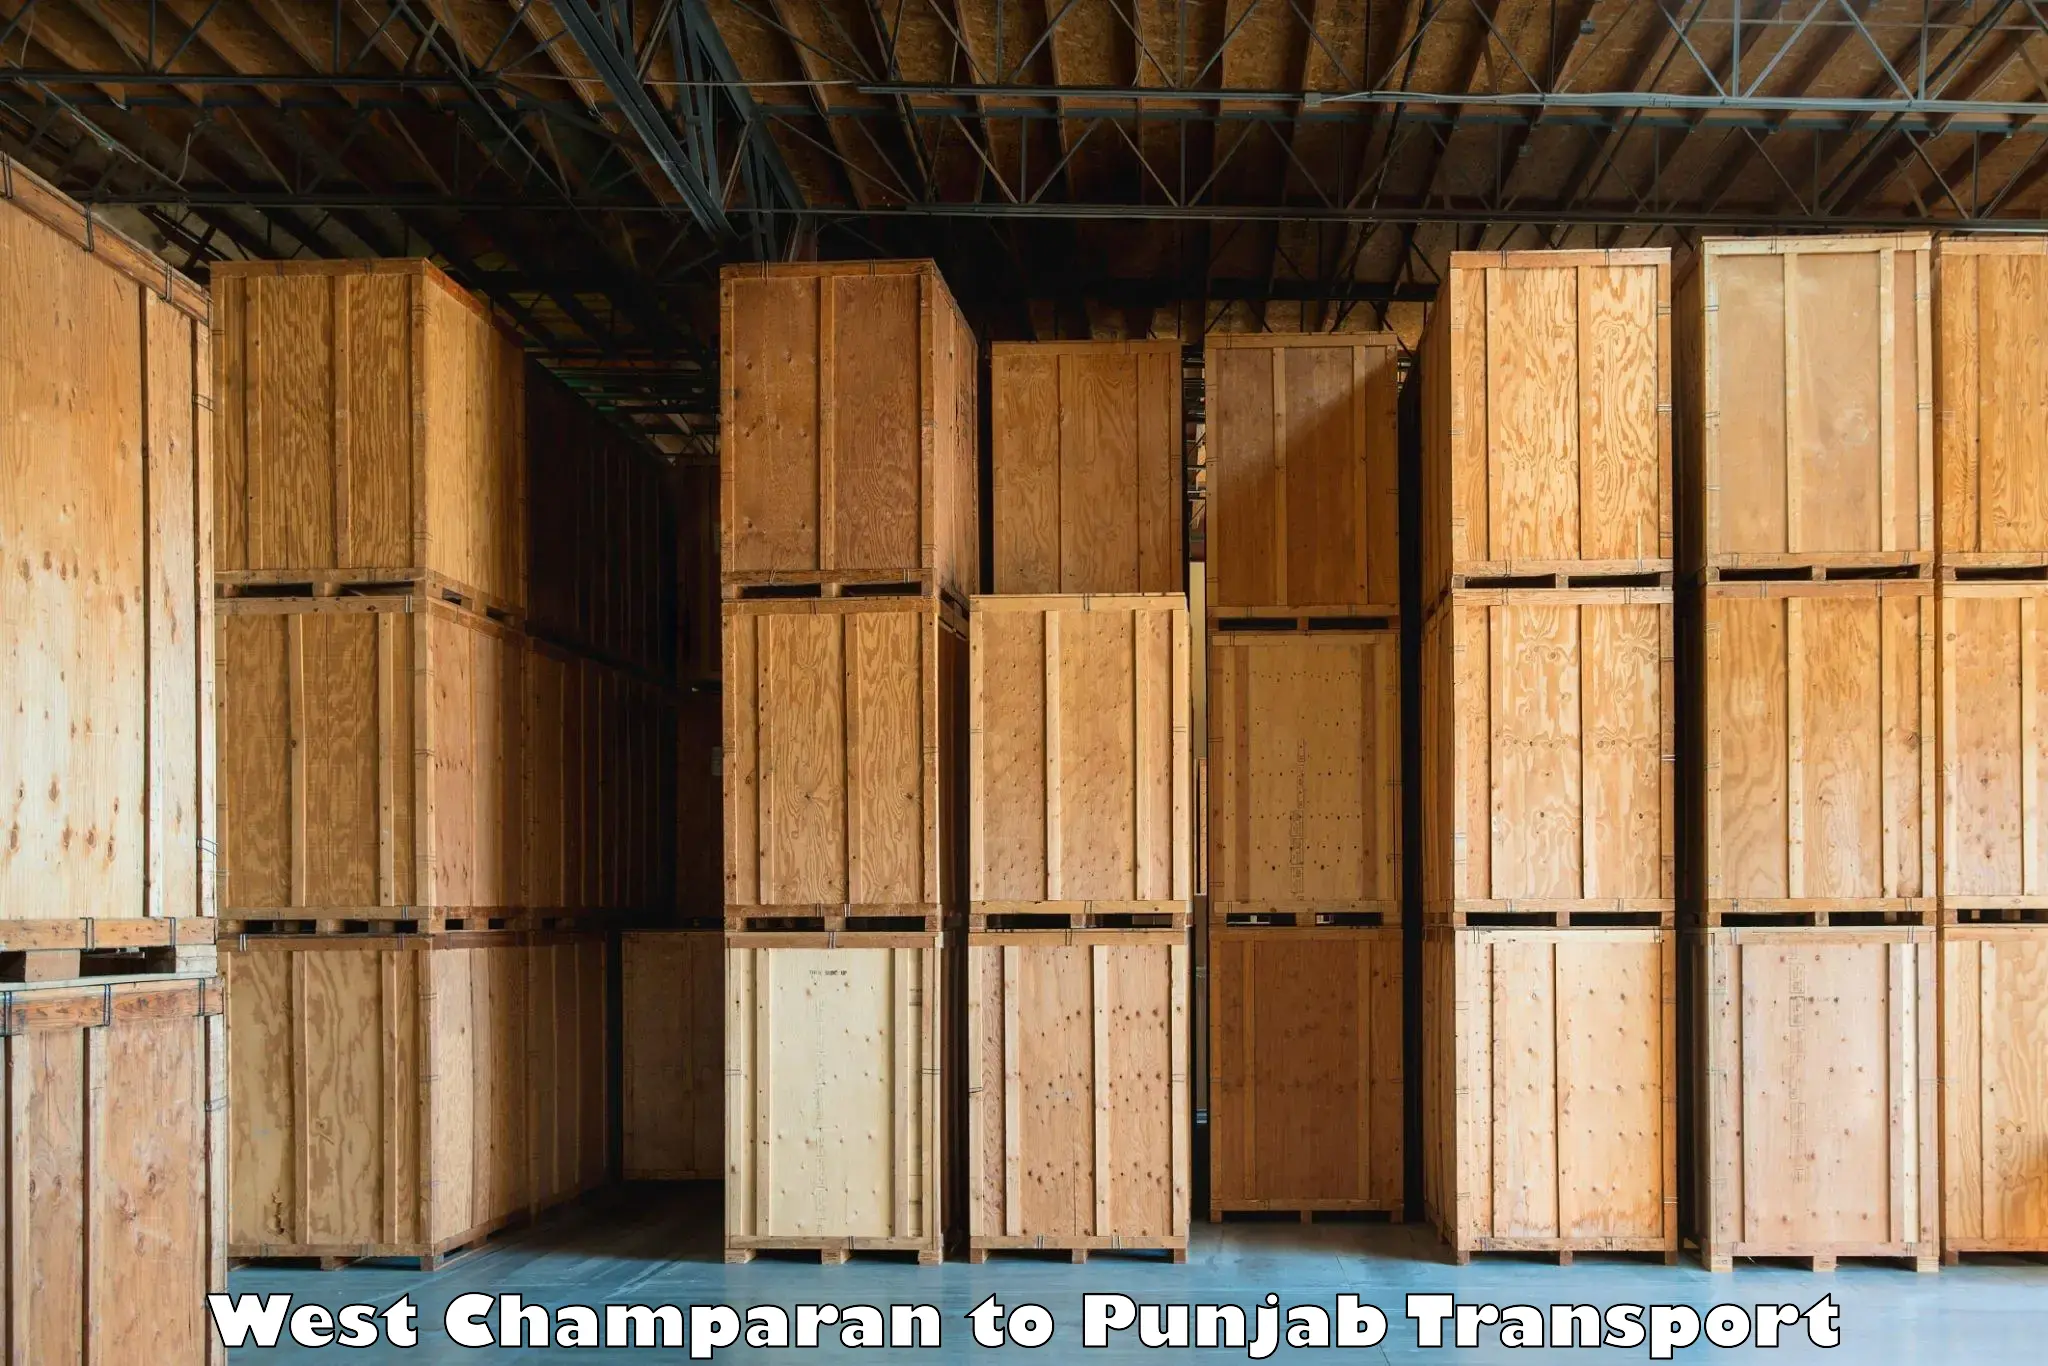 Road transport services in West Champaran to Ludhiana